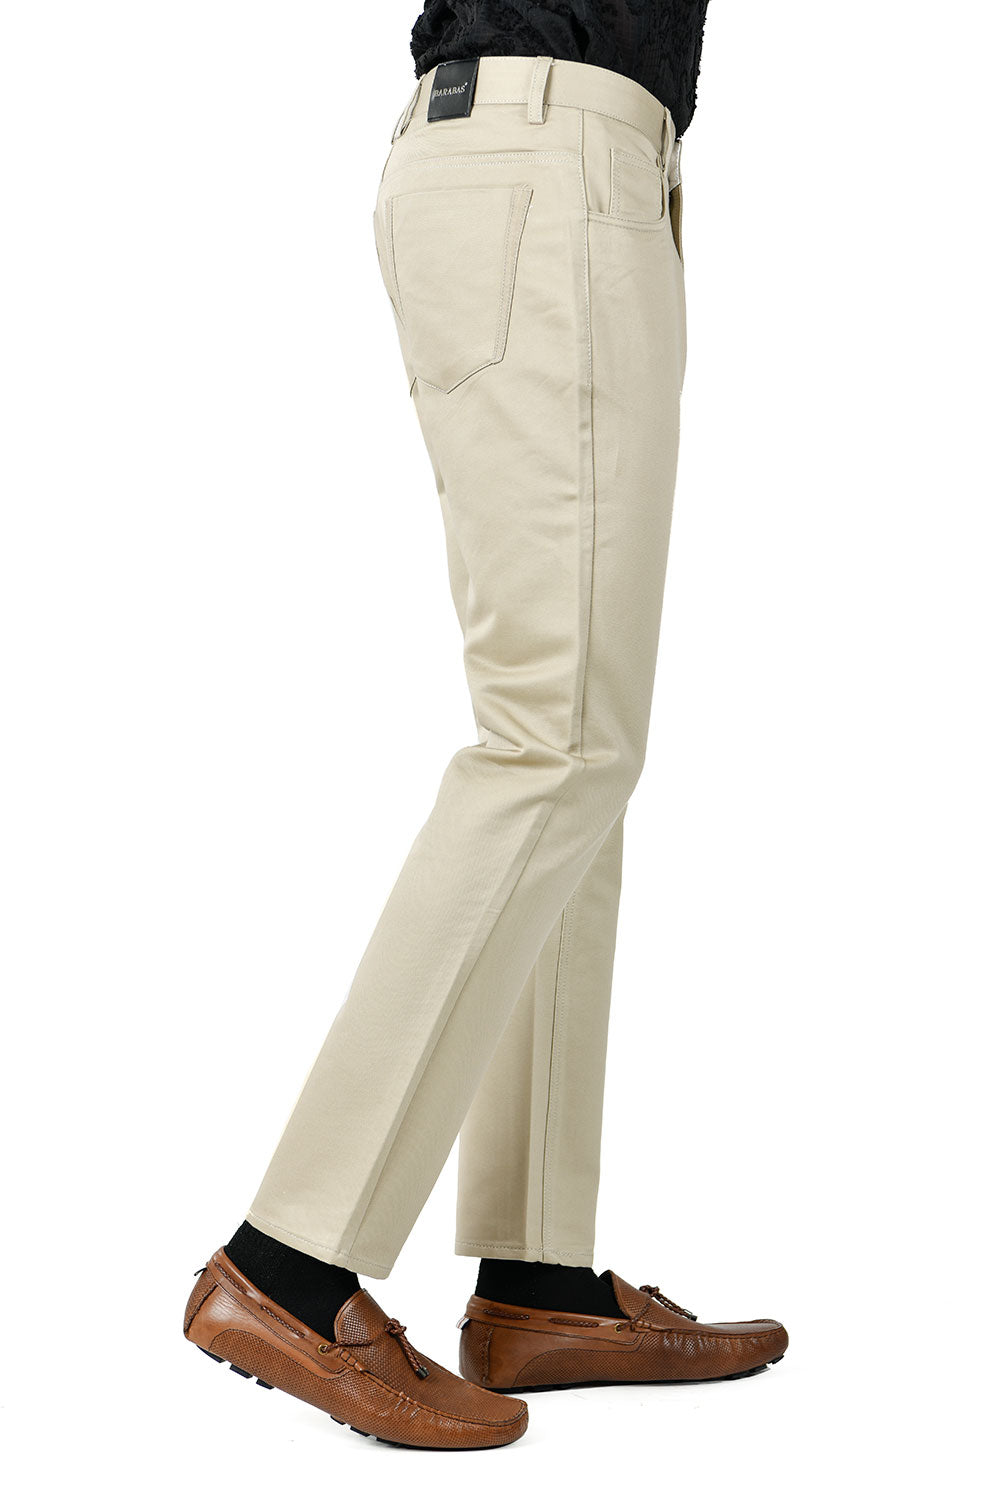 Barabas Men's Solid Color Zip and Cream Straight Fit Pants B2060